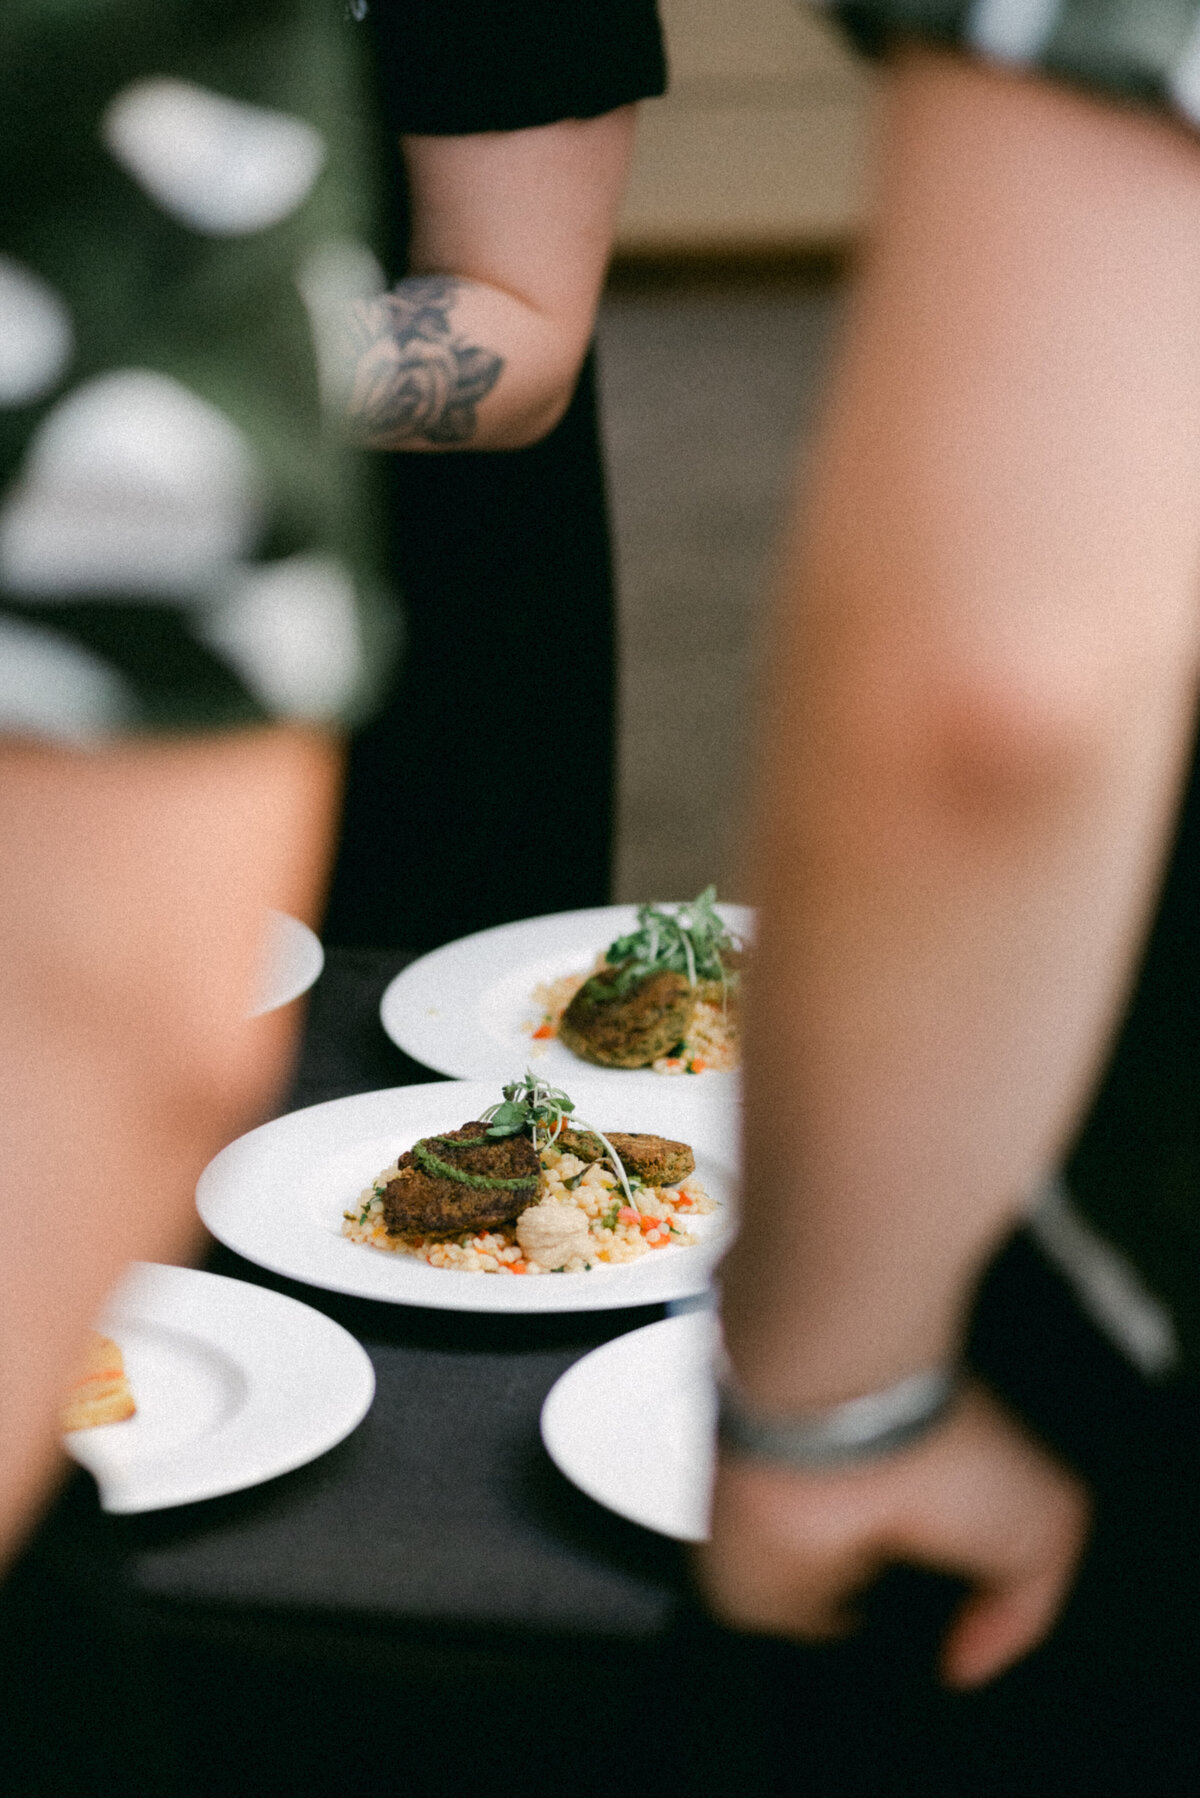 Catering preparing wedding dinner in an image photographed by wedding photographer Hannika Gabrielsson.